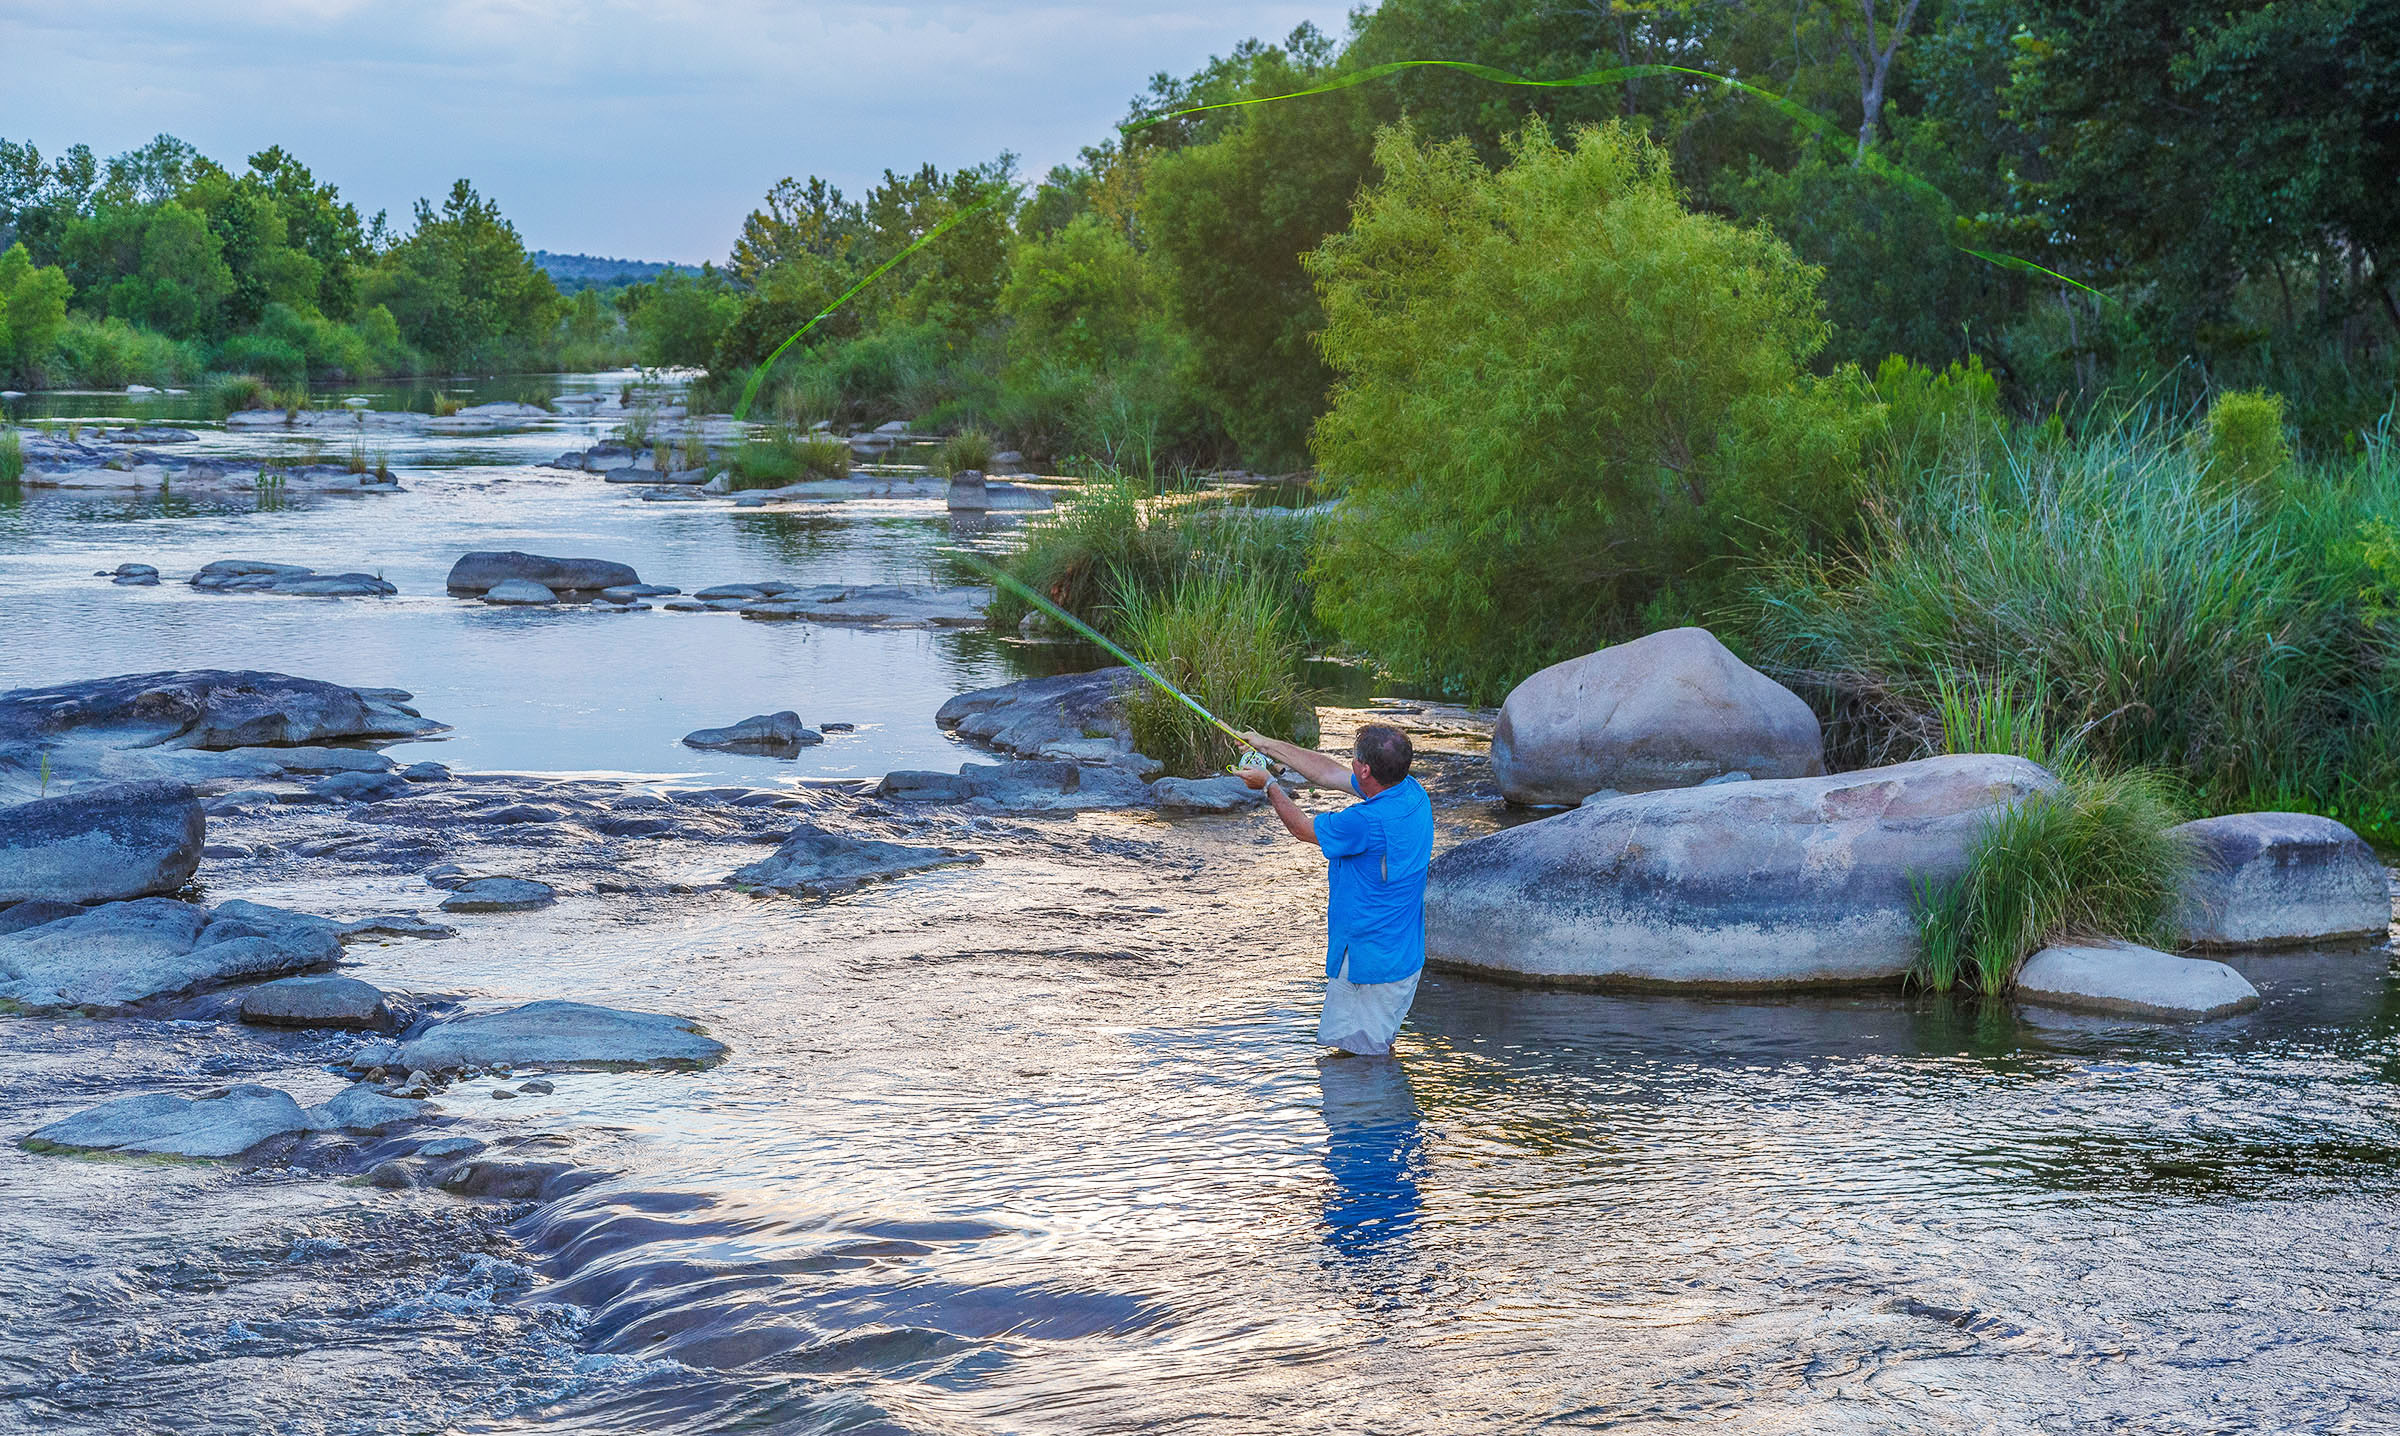 The Complete Guide to Freshwater Fishing